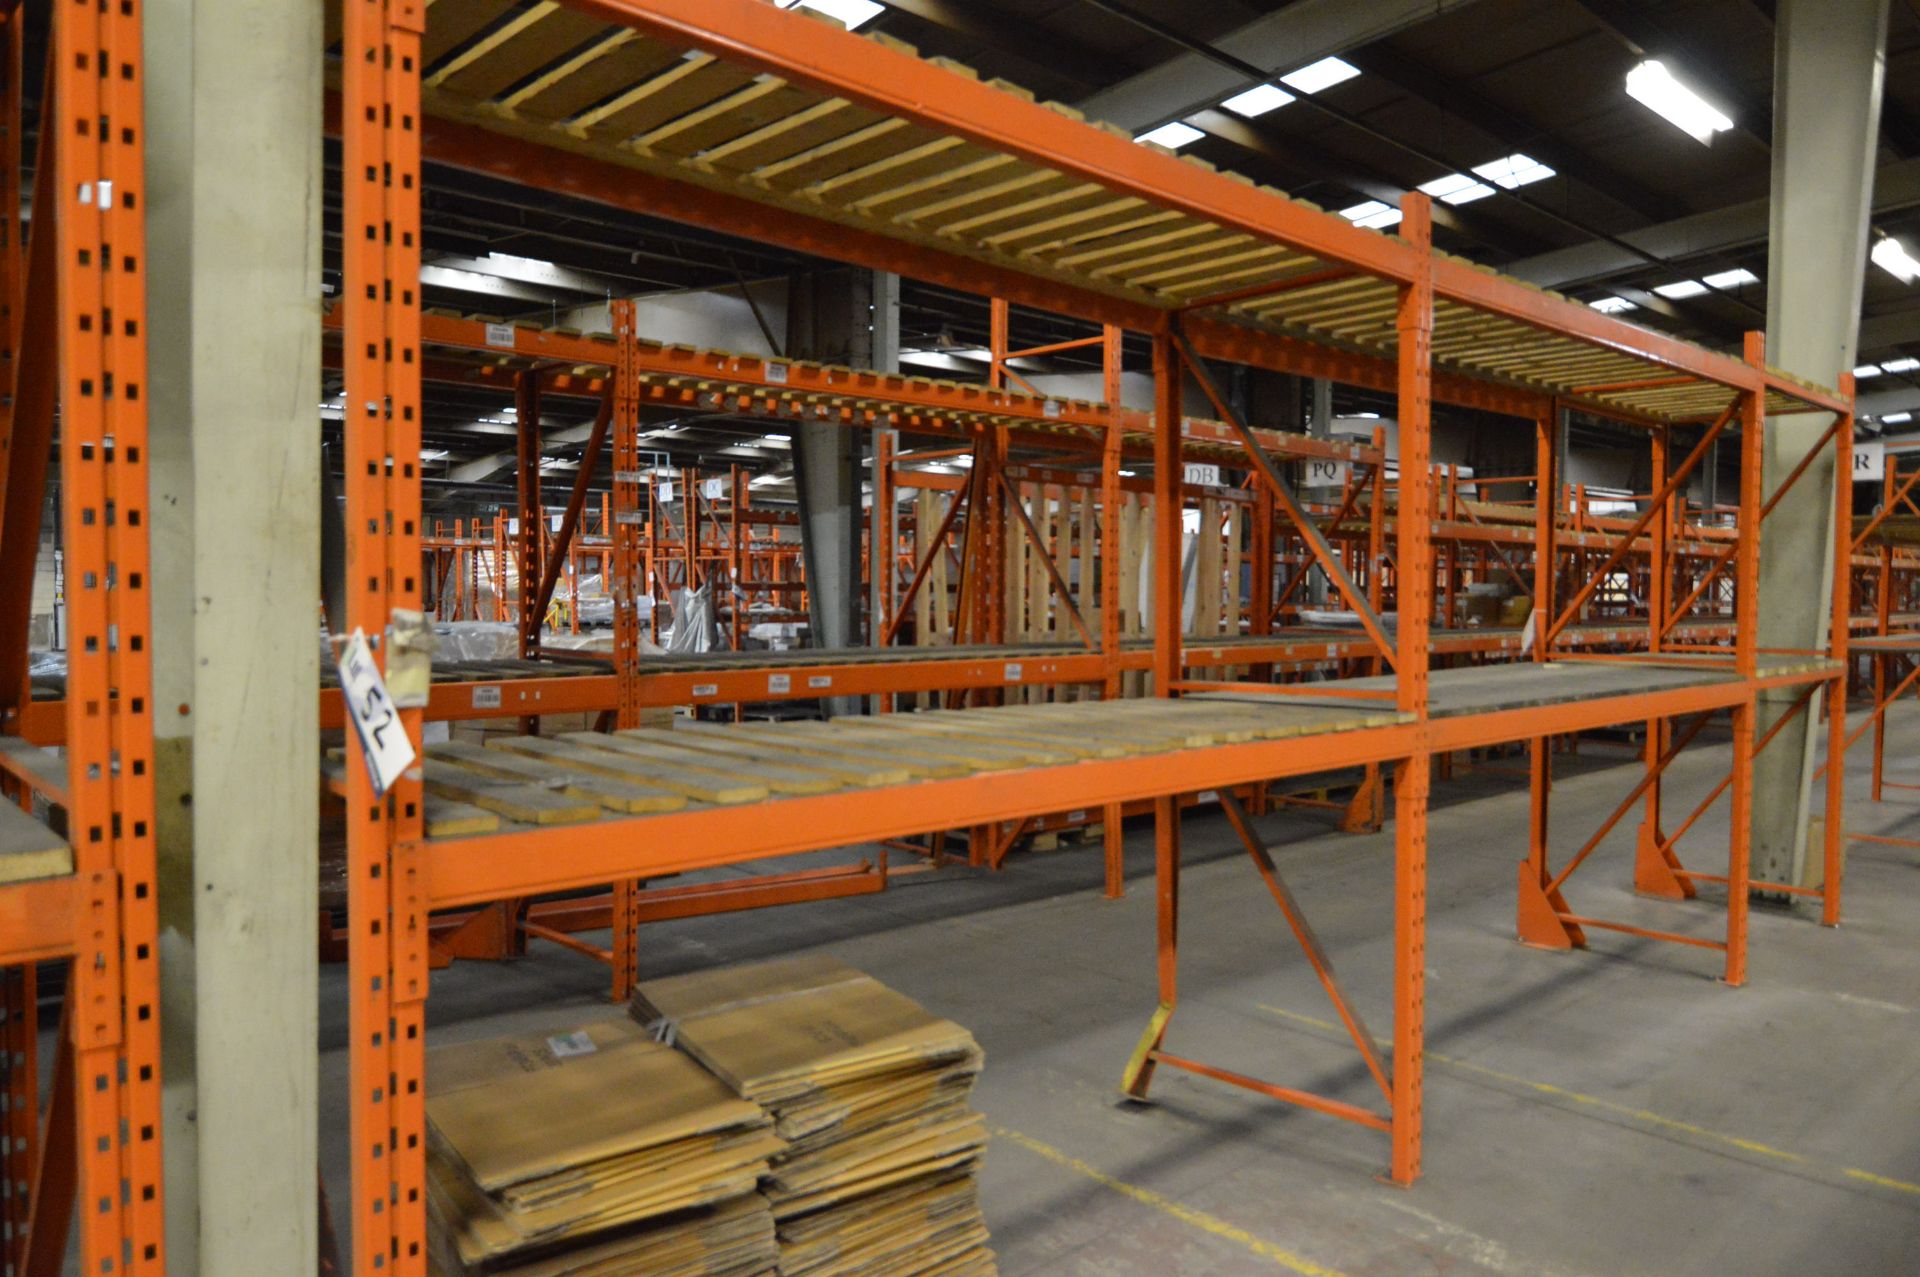 Redirack SD170 Single Sided Three Bay Two Tier Pallet Rack, approx. 7m long x 900mm x 2.7m high, - Image 2 of 2